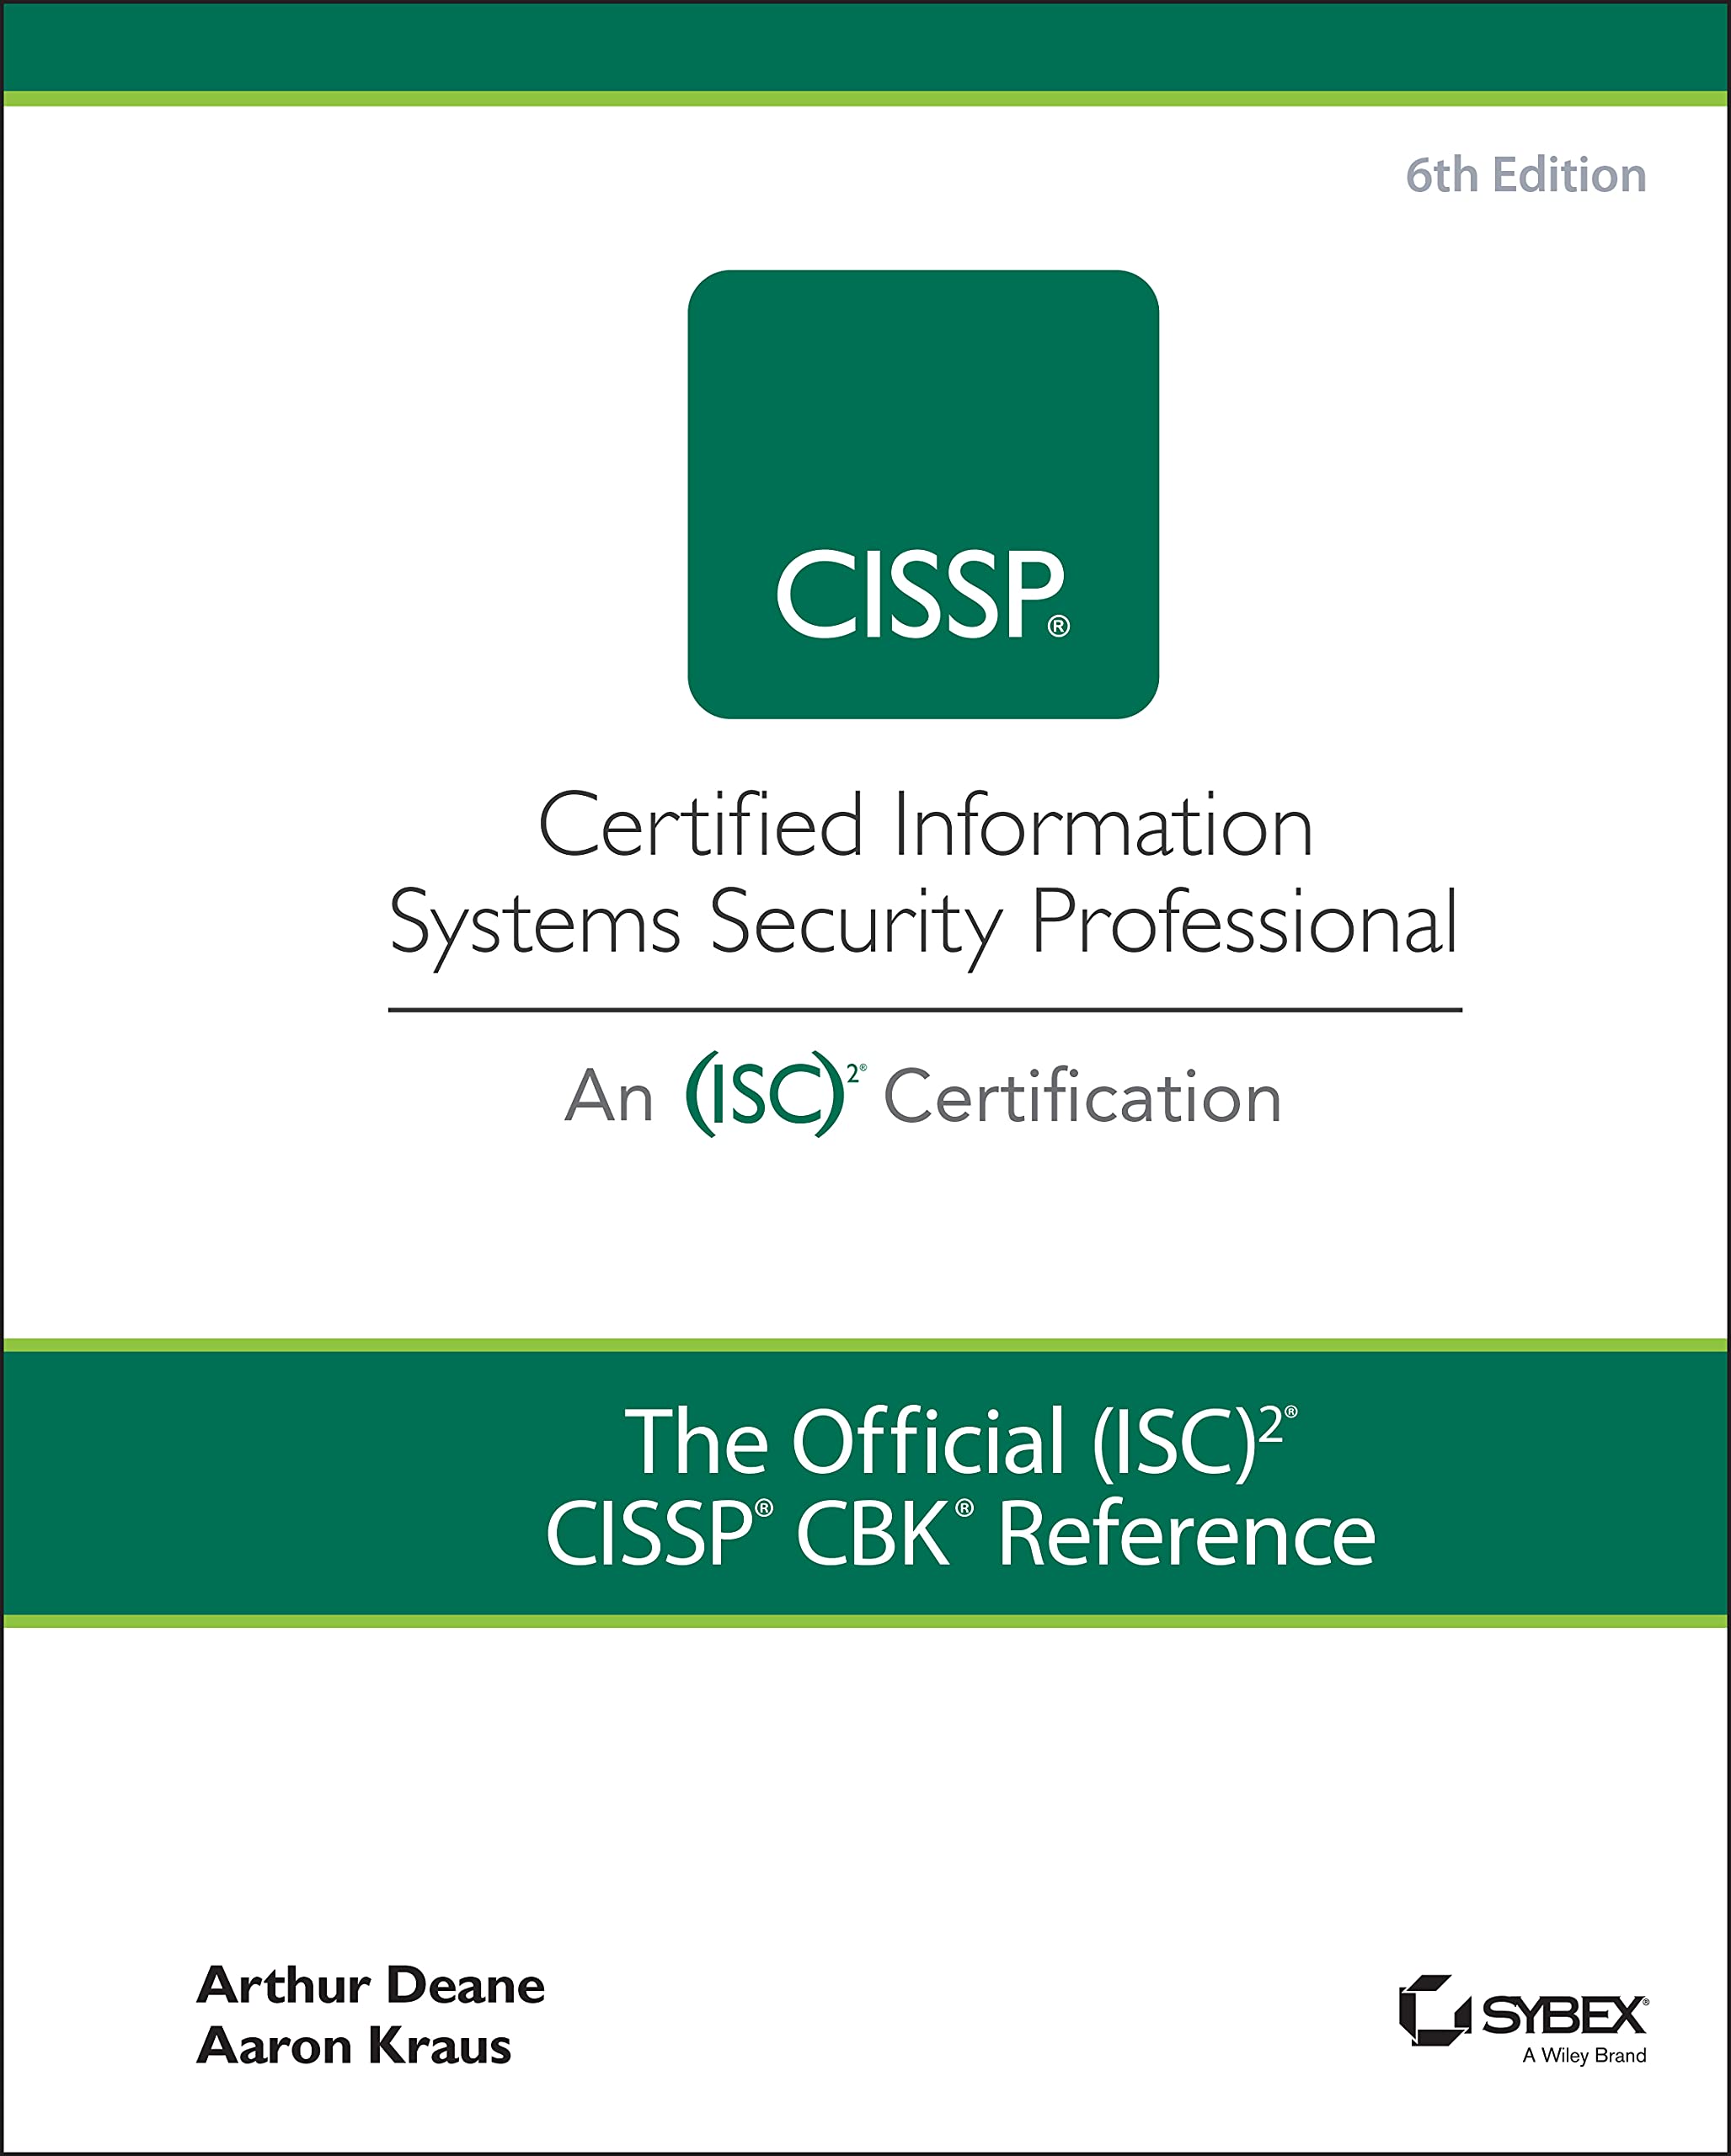 The Official (ISC)2 CISSP CBK Reference (Cissp: Certified Information Systems Security Professional)